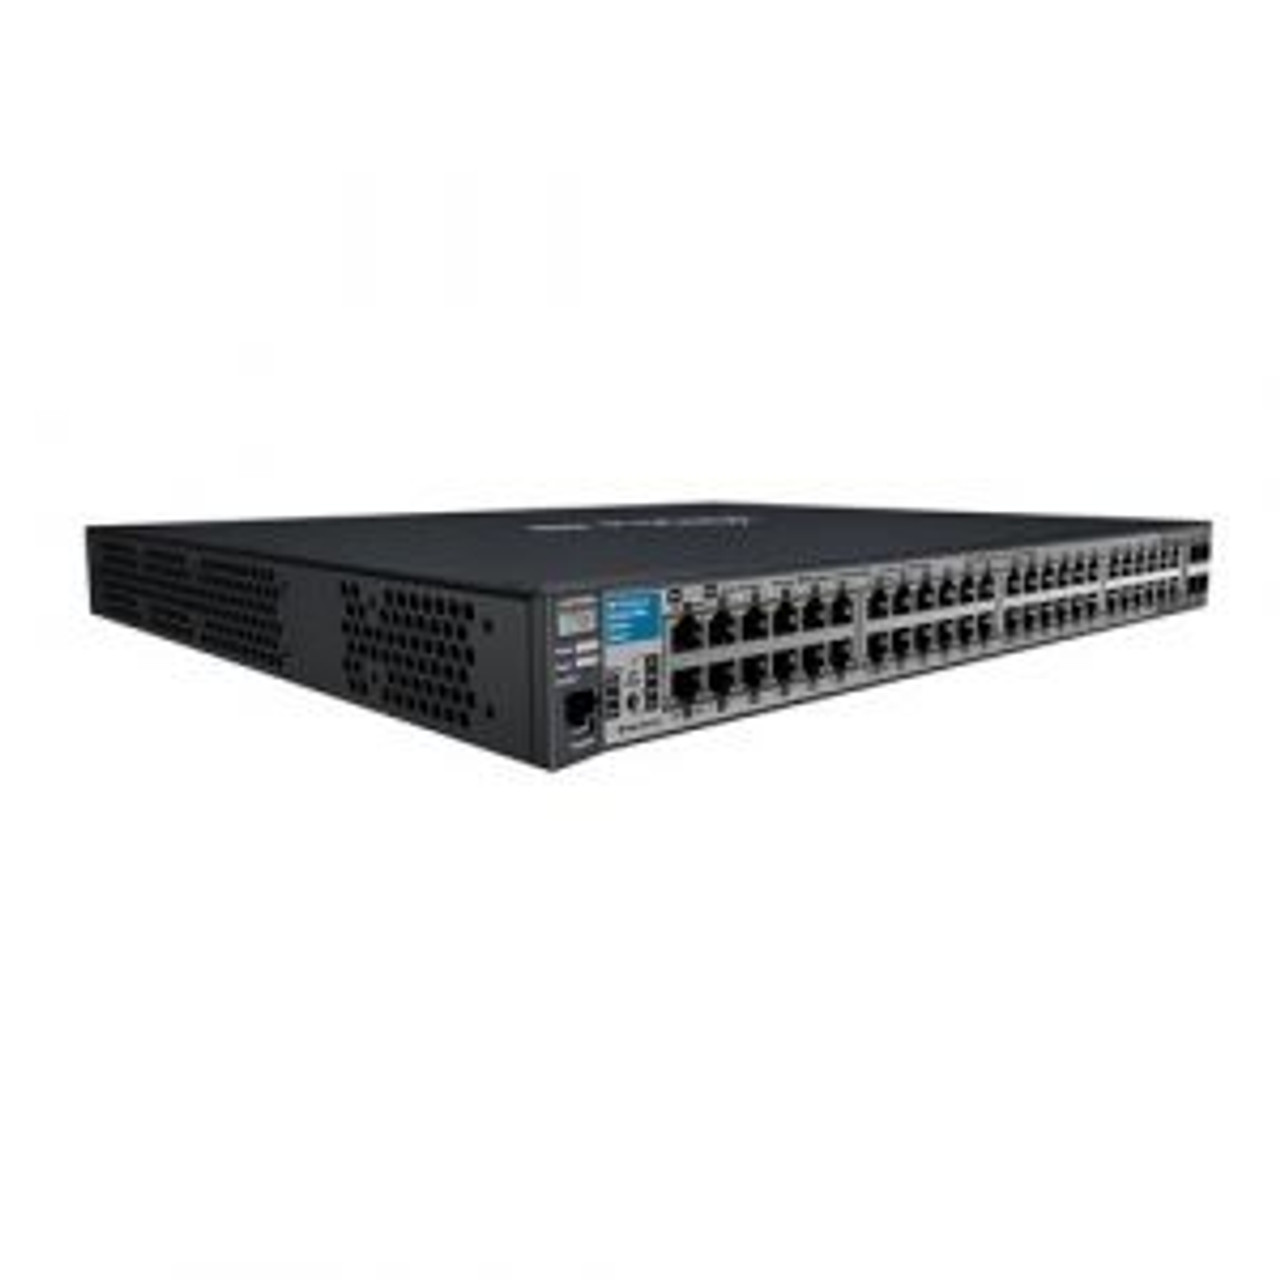 J9147-69001 HP ProCurve E2910al-48G 48-Ports Layer-2 Managed Stackable Gigabit Ethernet Switch with 4 x SFP (mini-GBIC)